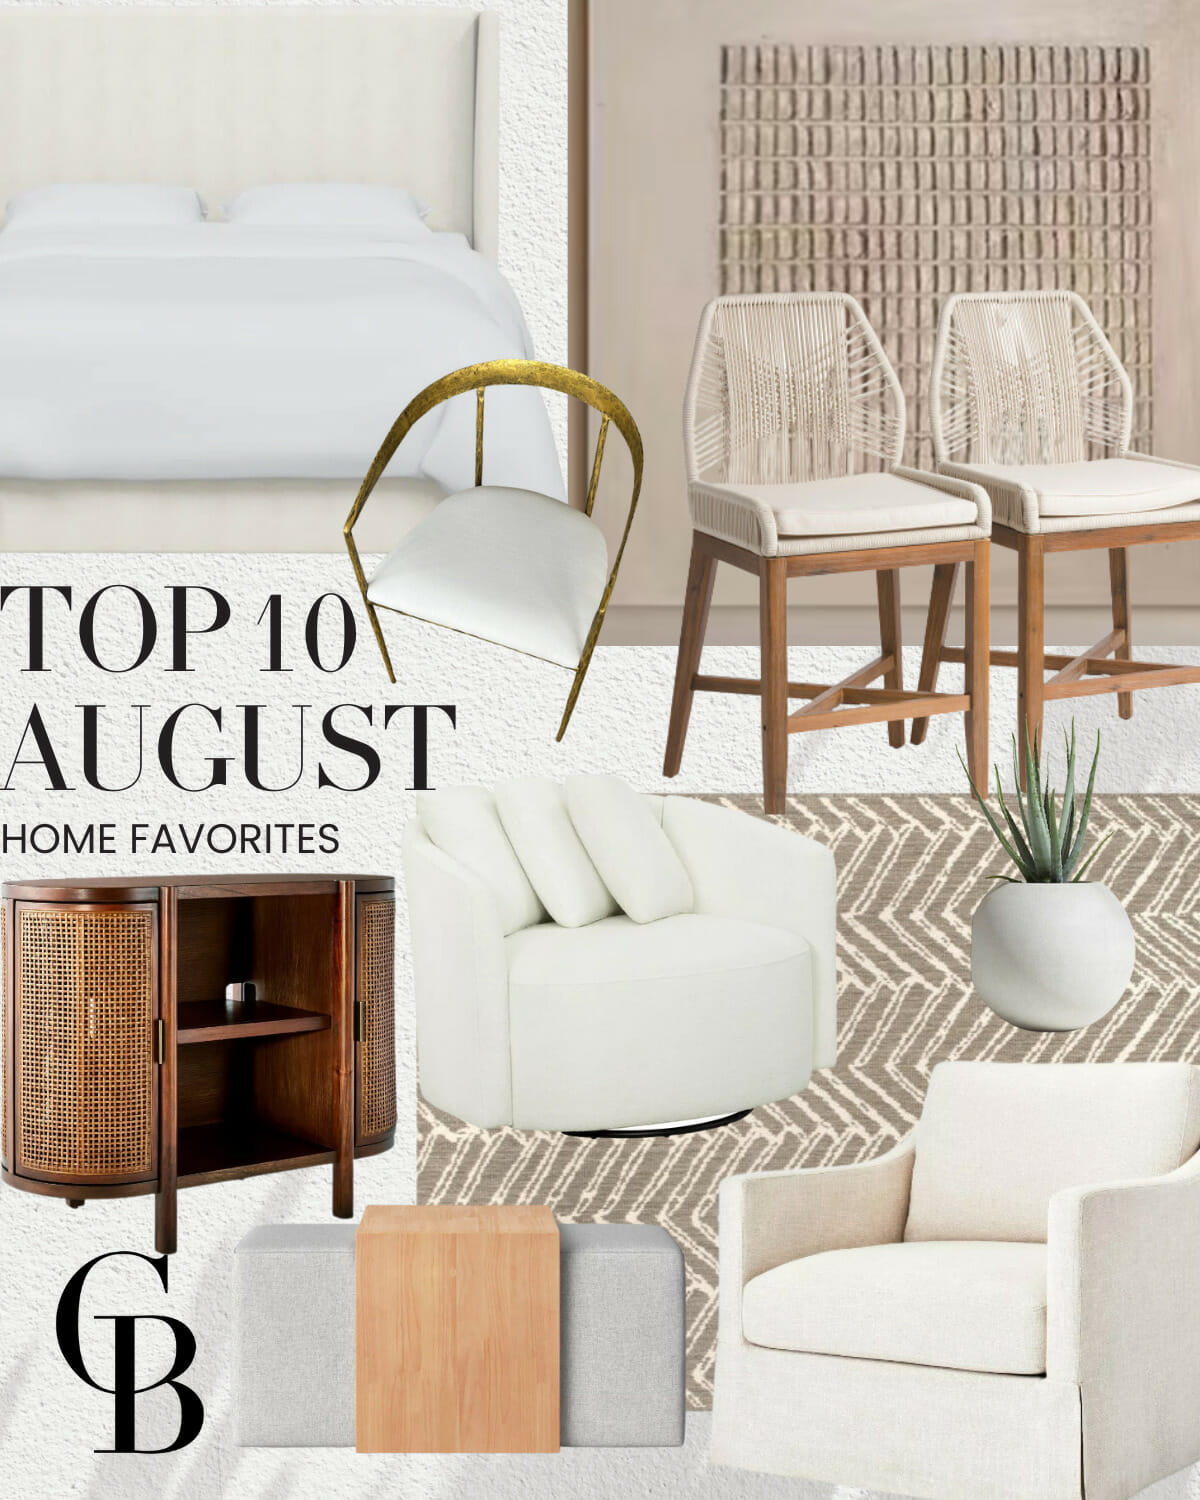 august top sellers | #august #topsellers #bestsellers #furniture #homedecor #decor #fall #furniture #chair #dresser